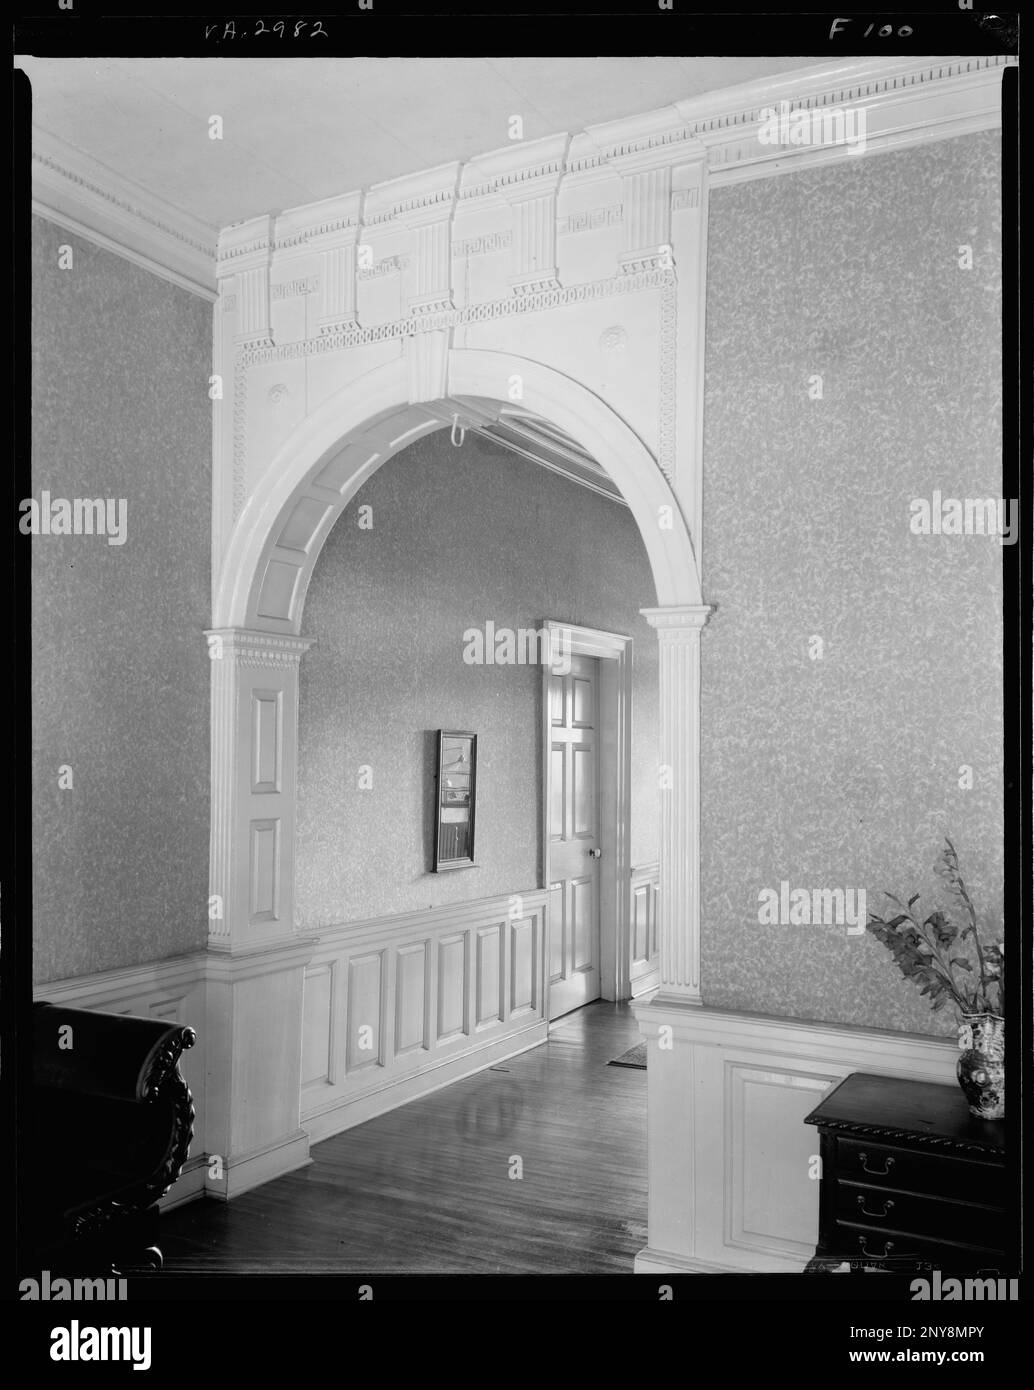 Dr. Charles Mortimer's house, Fredericksburg, Virginia. Carnegie Survey of the Architecture of the South. United States  Virginia  Fredericksburg, Arches, Paneling, Moldings, Interiors. Stock Photo